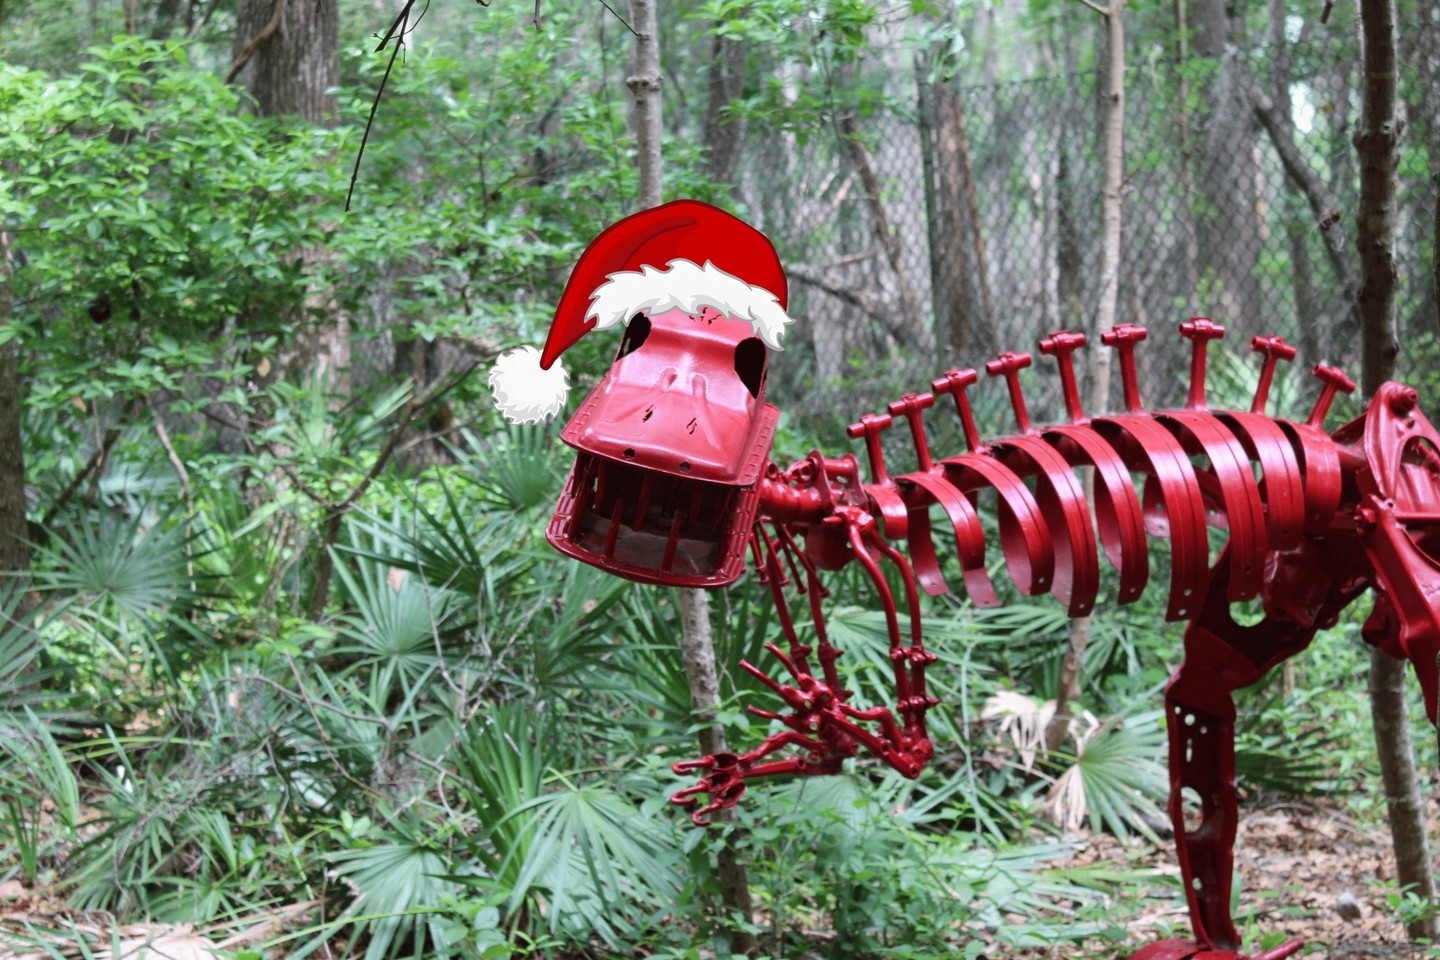 Happy Holidays from the Tallahassee Museum! We are closed today and Christmas Day but we look forward to seeing you during regular business hours starting Dec. 26. #TallahasseeMuseum